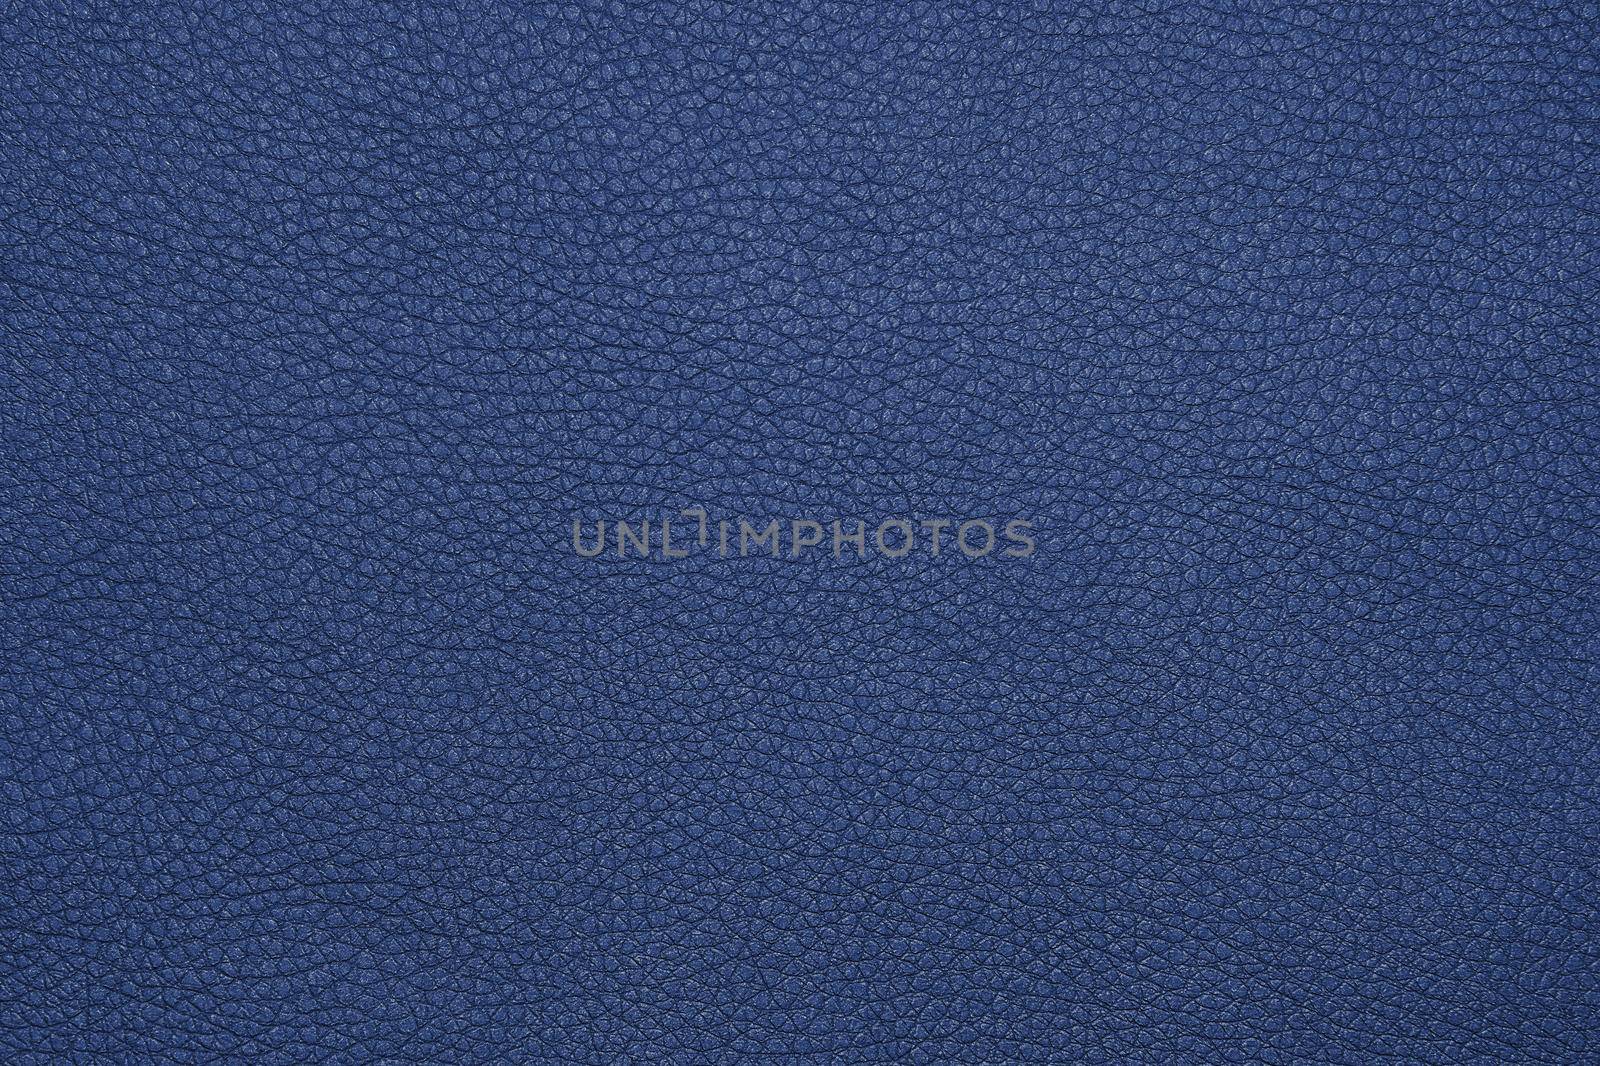 Background texture of blue natural leather grain by BreakingTheWalls